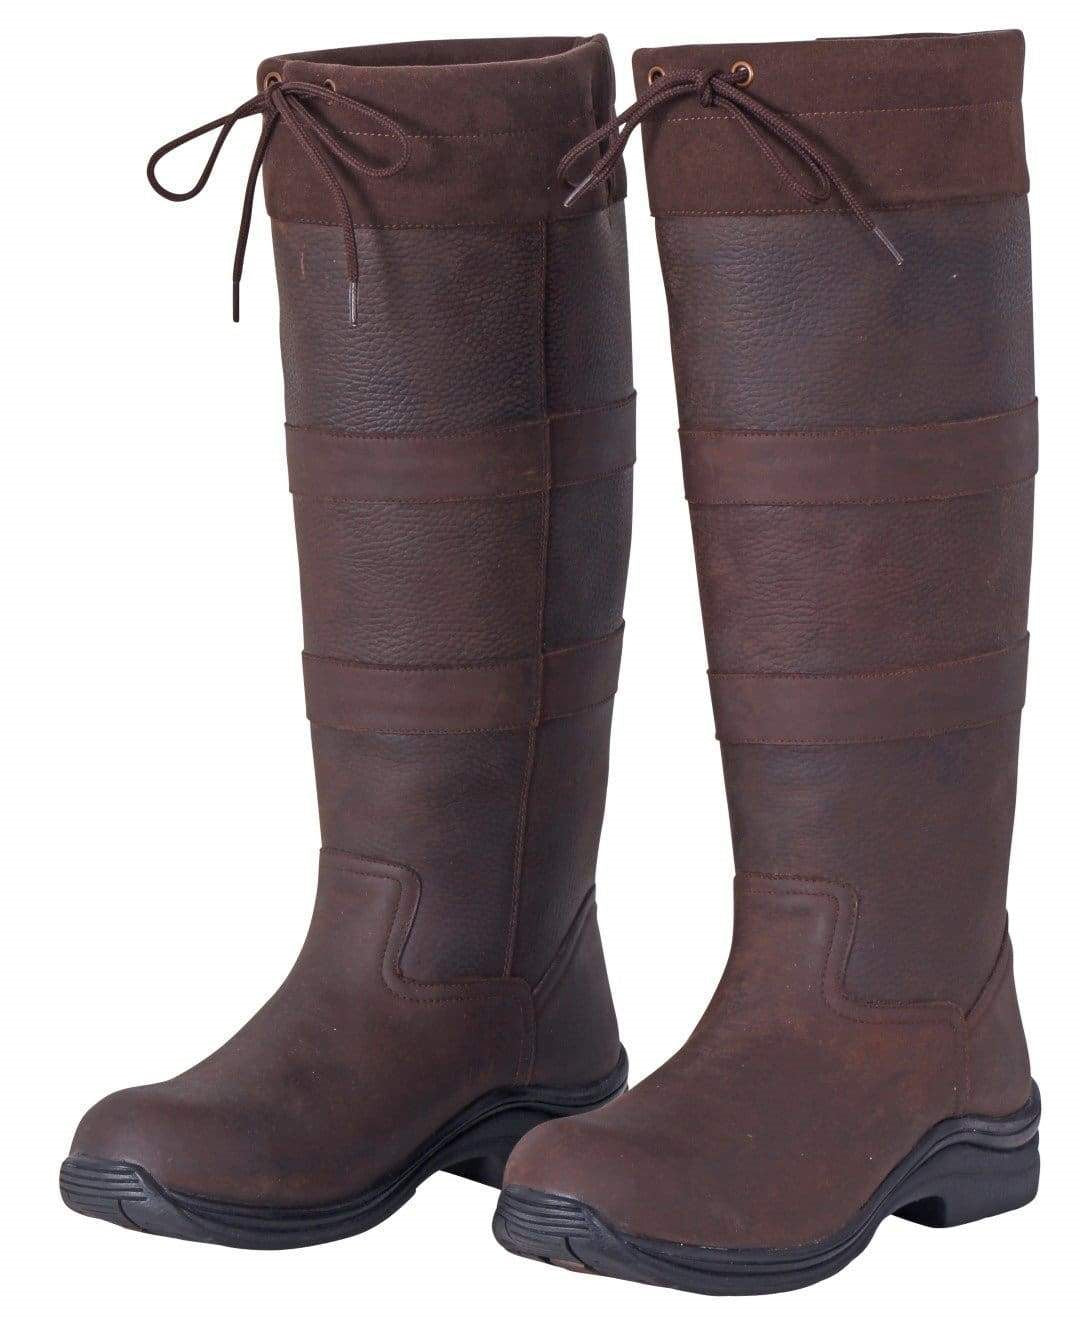 Cavallino Leather Country Long Boots